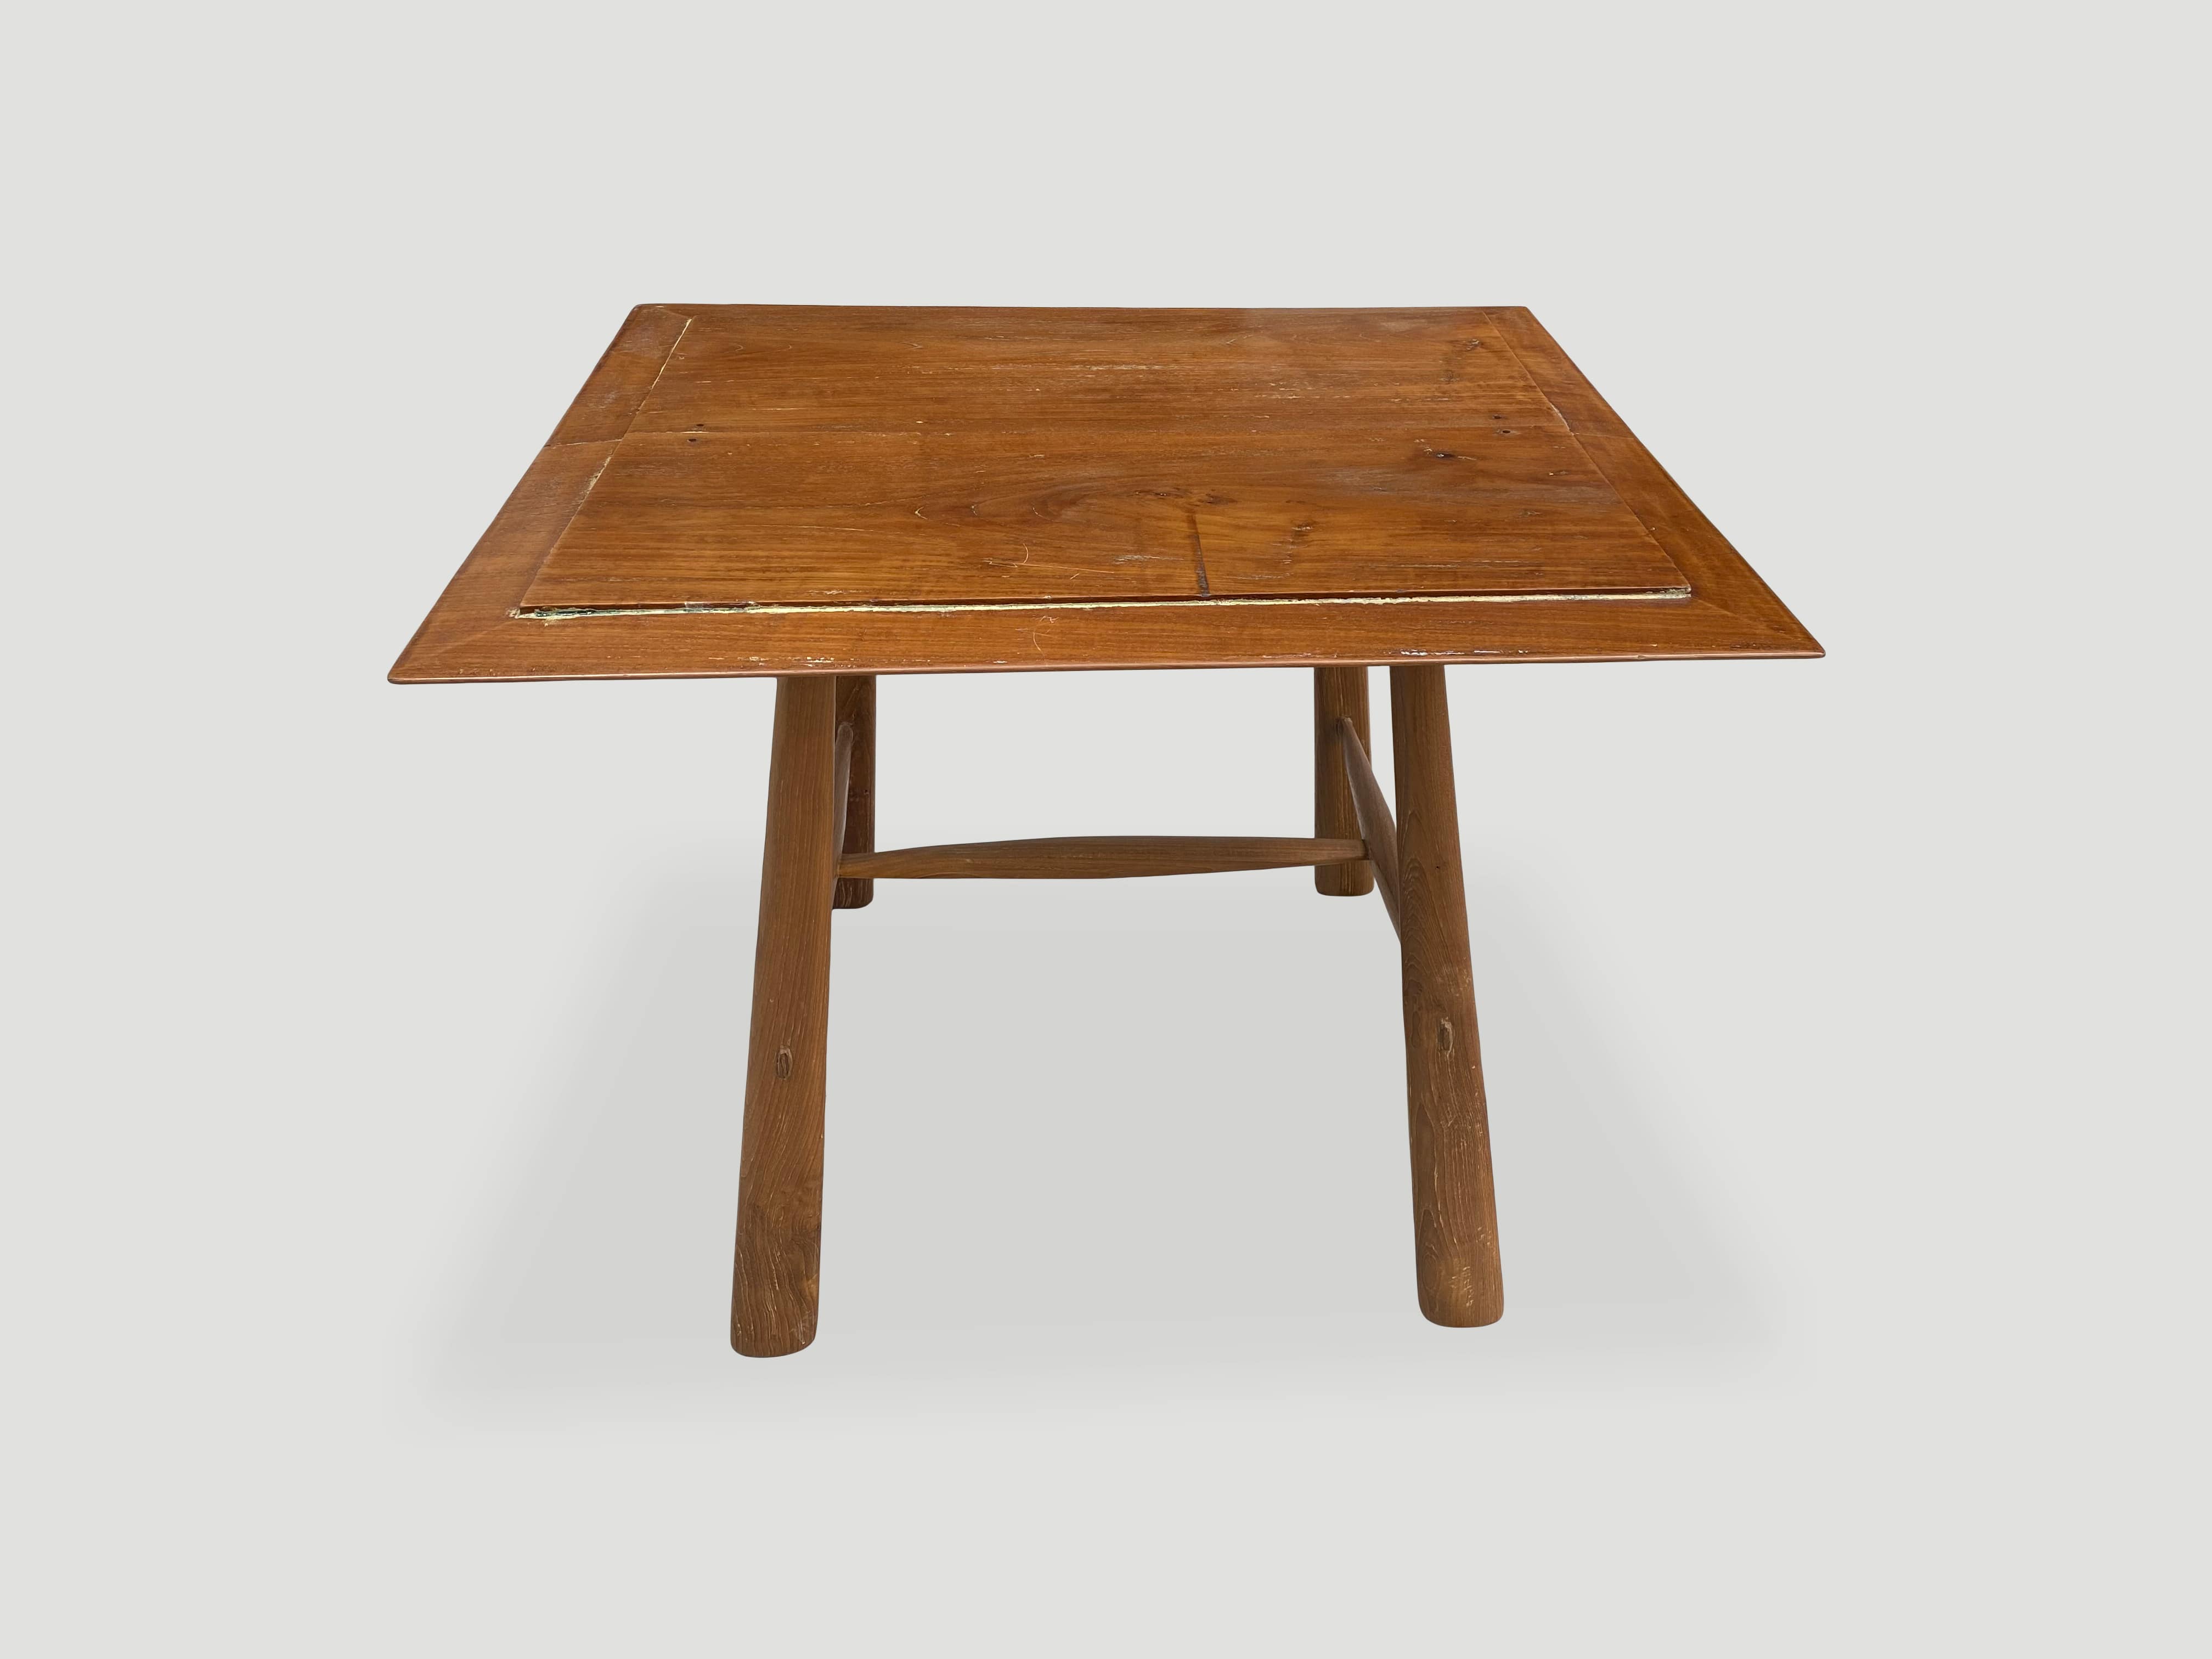 MID CENTURY COUTURE TEAK COCKTAIL TABLE, CARD TABLE OR ENTRY TABLE.